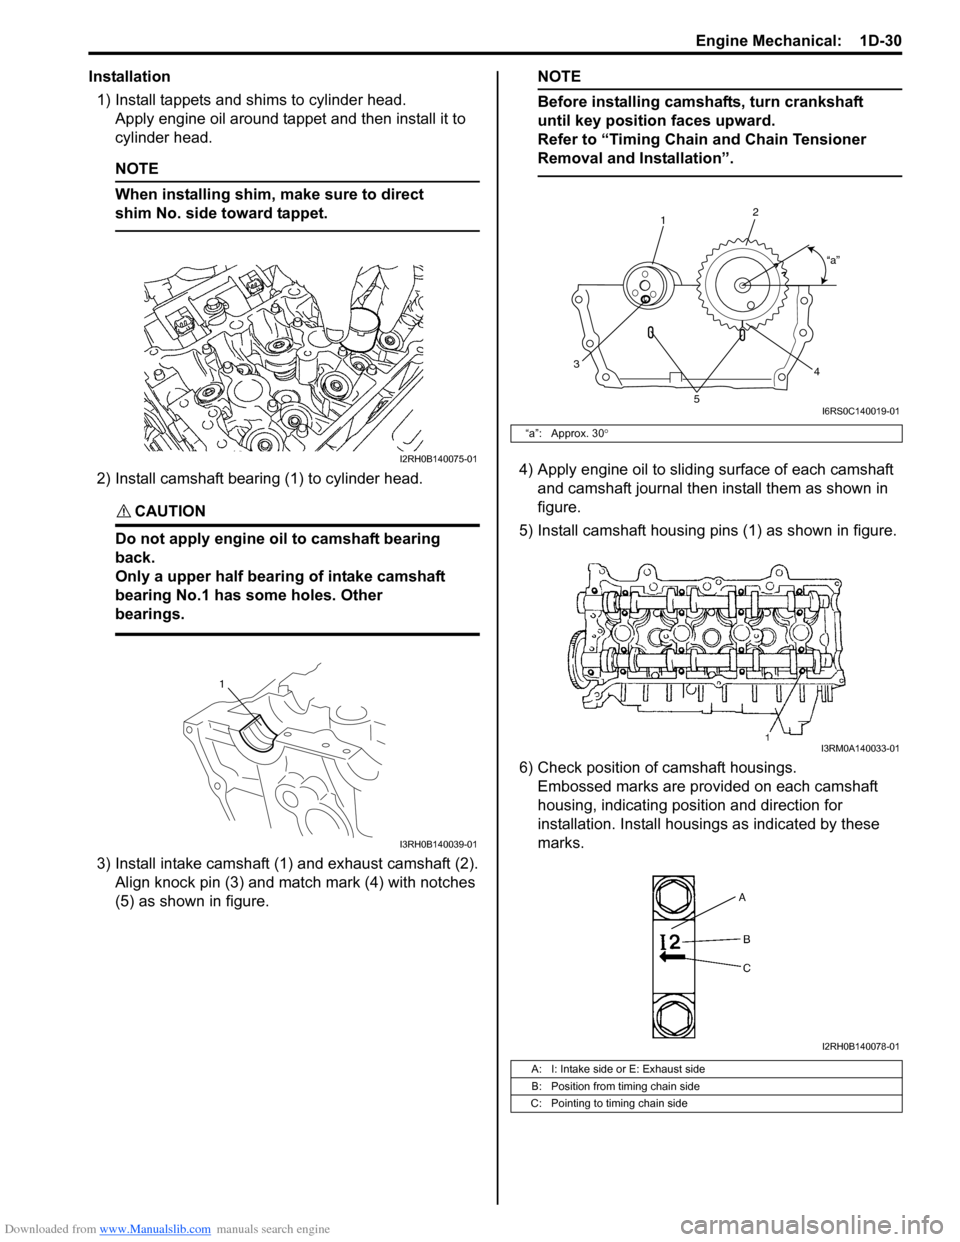 SUZUKI SWIFT 2006 2.G Service Owners Guide Downloaded from www.Manualslib.com manuals search engine Engine Mechanical:  1D-30
Installation1) Install tappets and shims to cylinder head. Apply engine oil around tappet and then install it to 
cyl